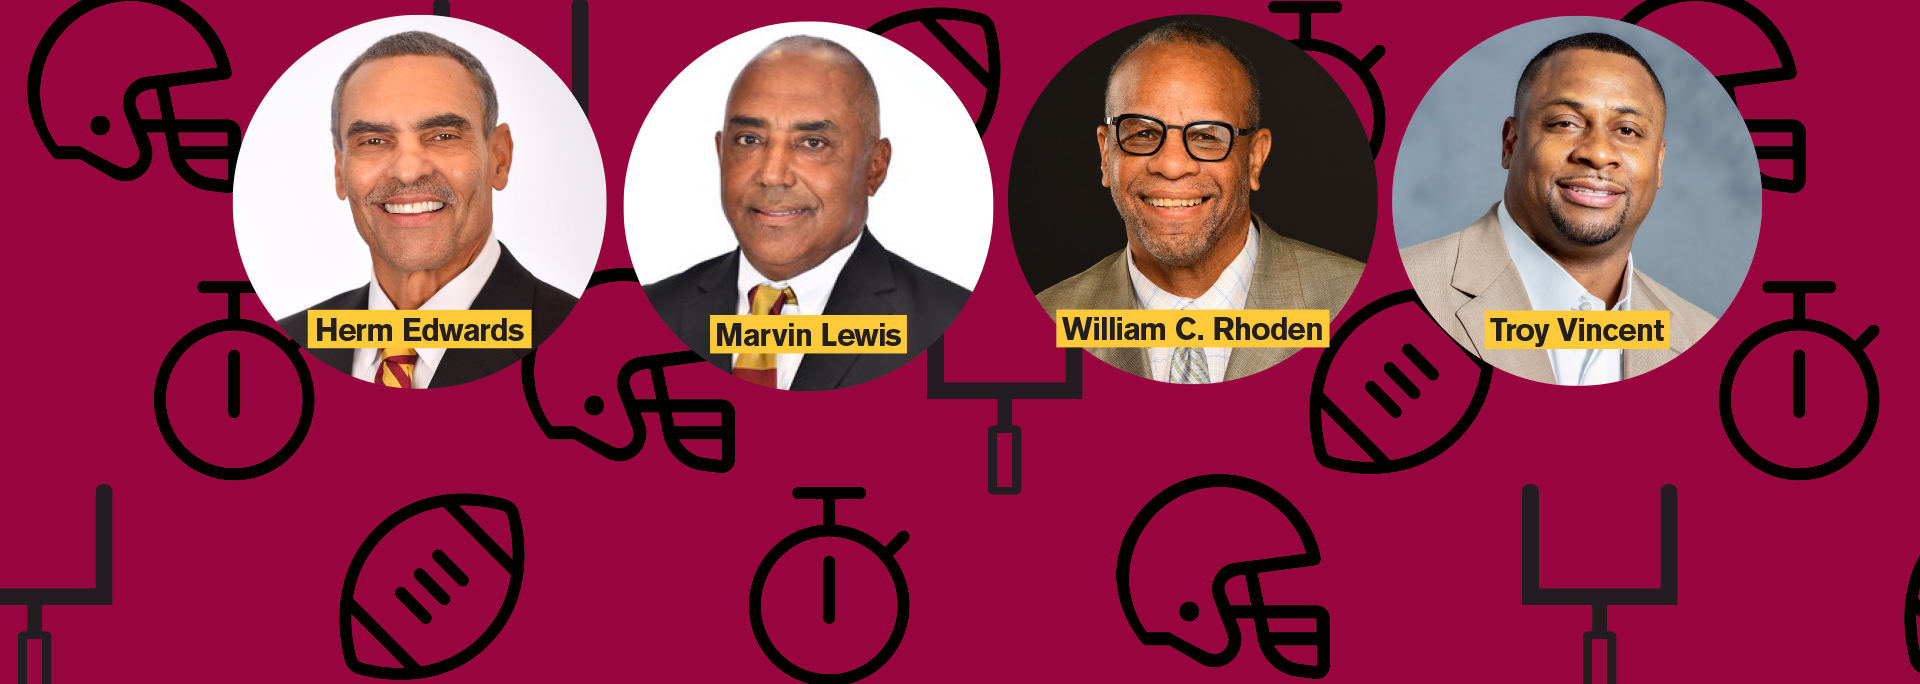 diversity and media in the NFL with Herm Edwards, Marvin Lewis, William C Rhoden and Troy Vincent